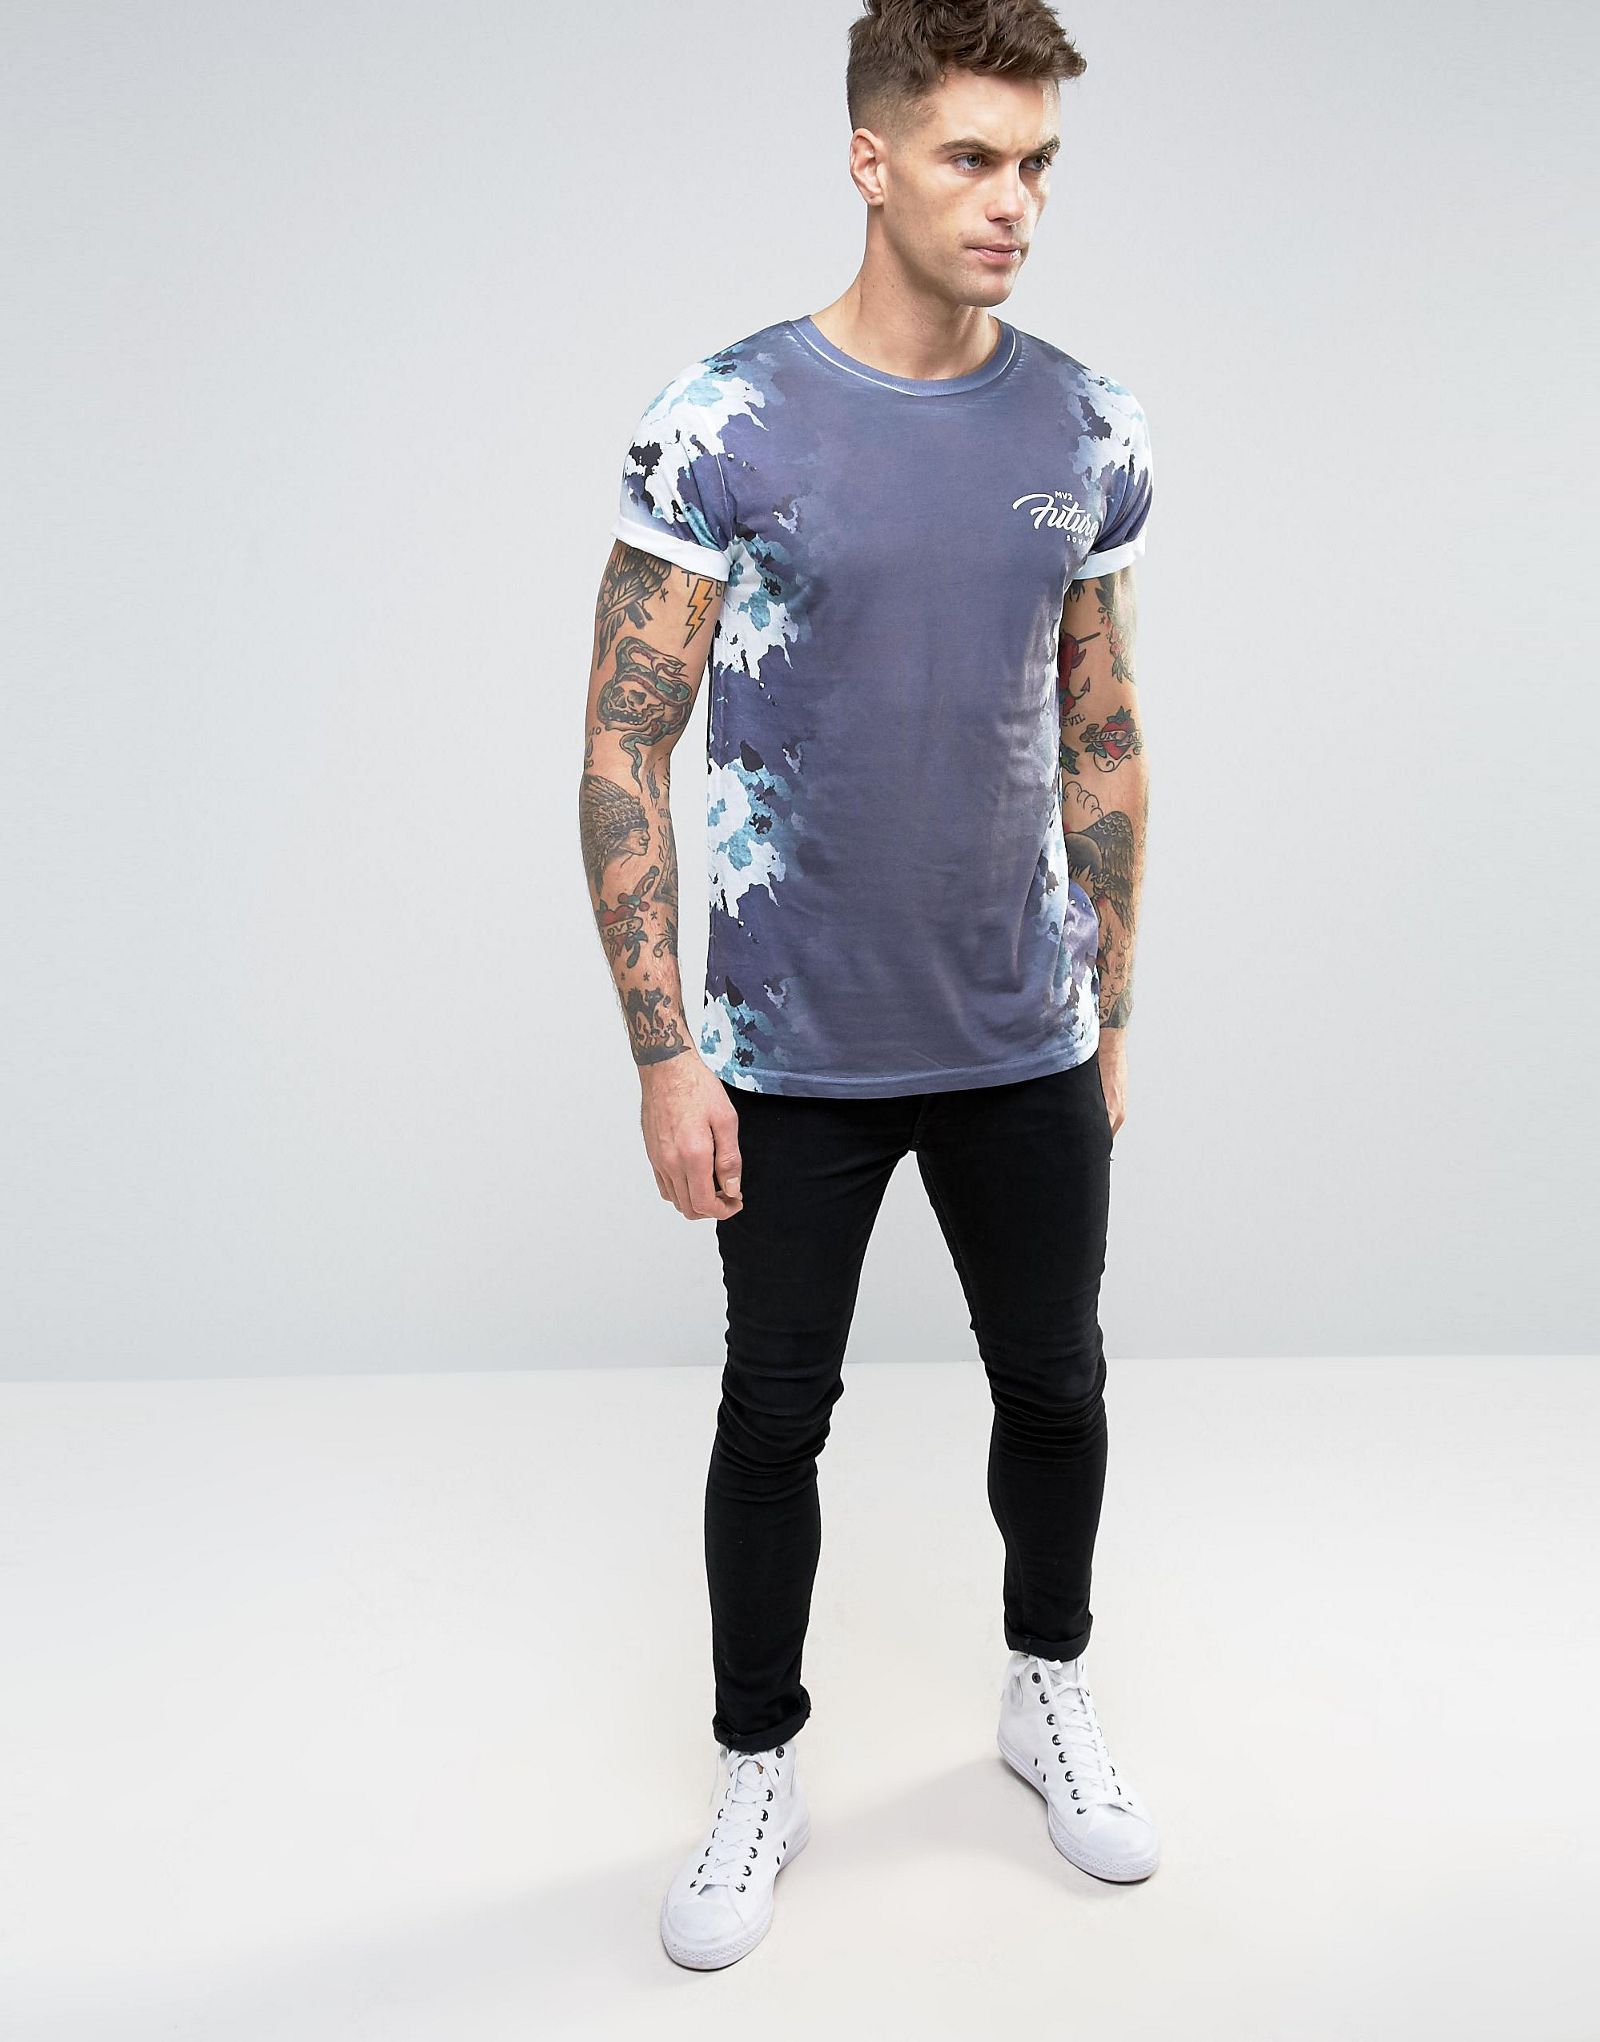 River Island T-Shirt With Side Camo Print In Navy